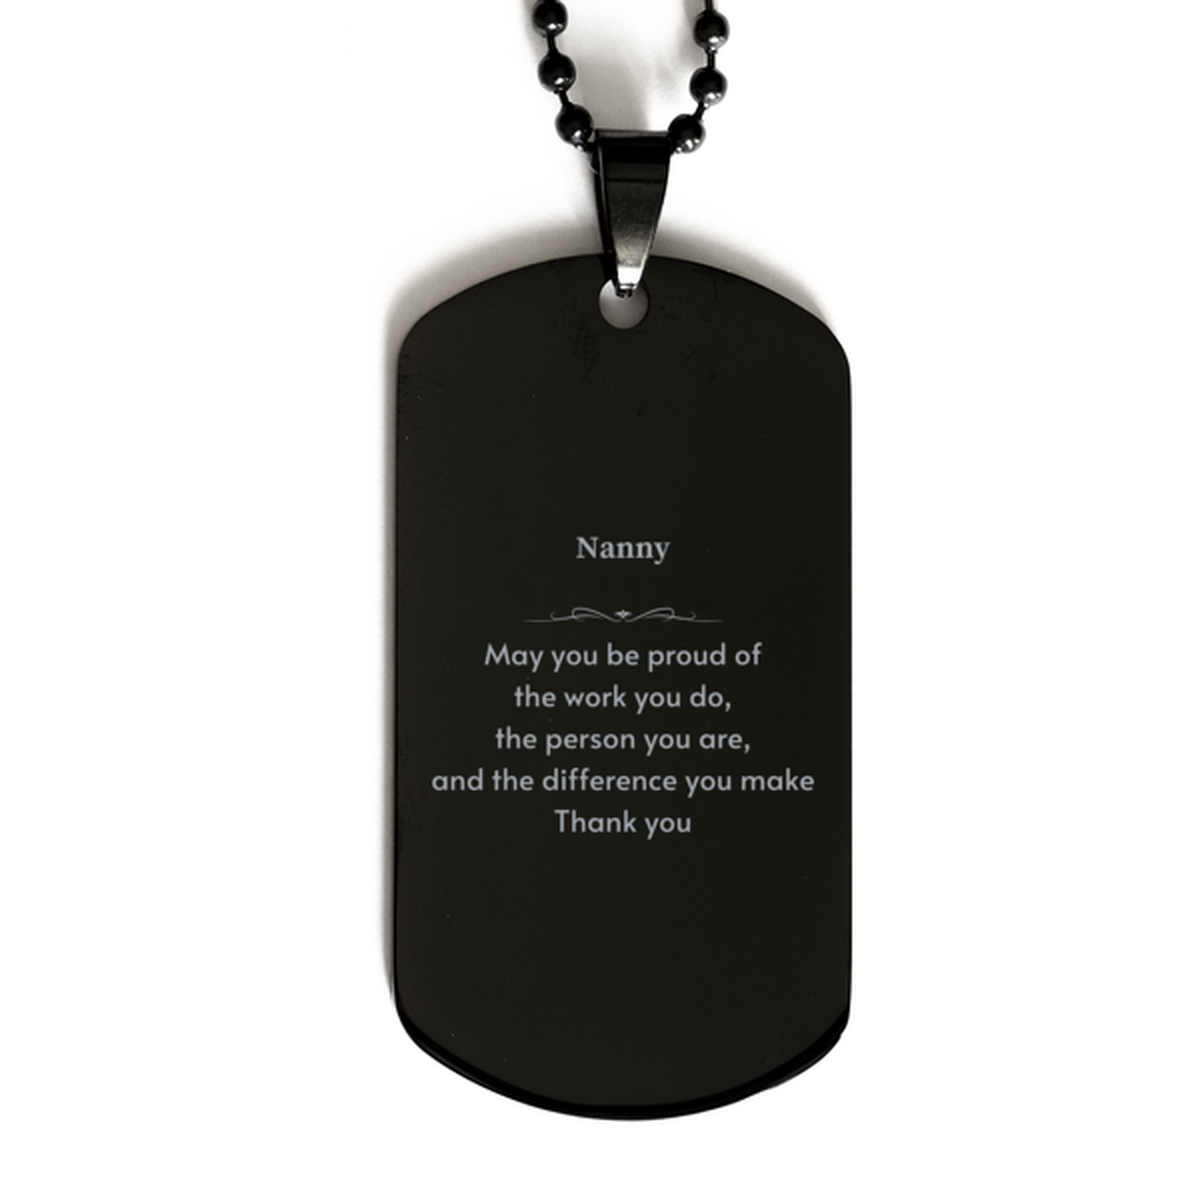 Heartwarming Black Dog Tag Retirement Coworkers Gifts for Nanny, Nanny May You be proud of the work you do, the person you are Gifts for Boss Men Women Friends